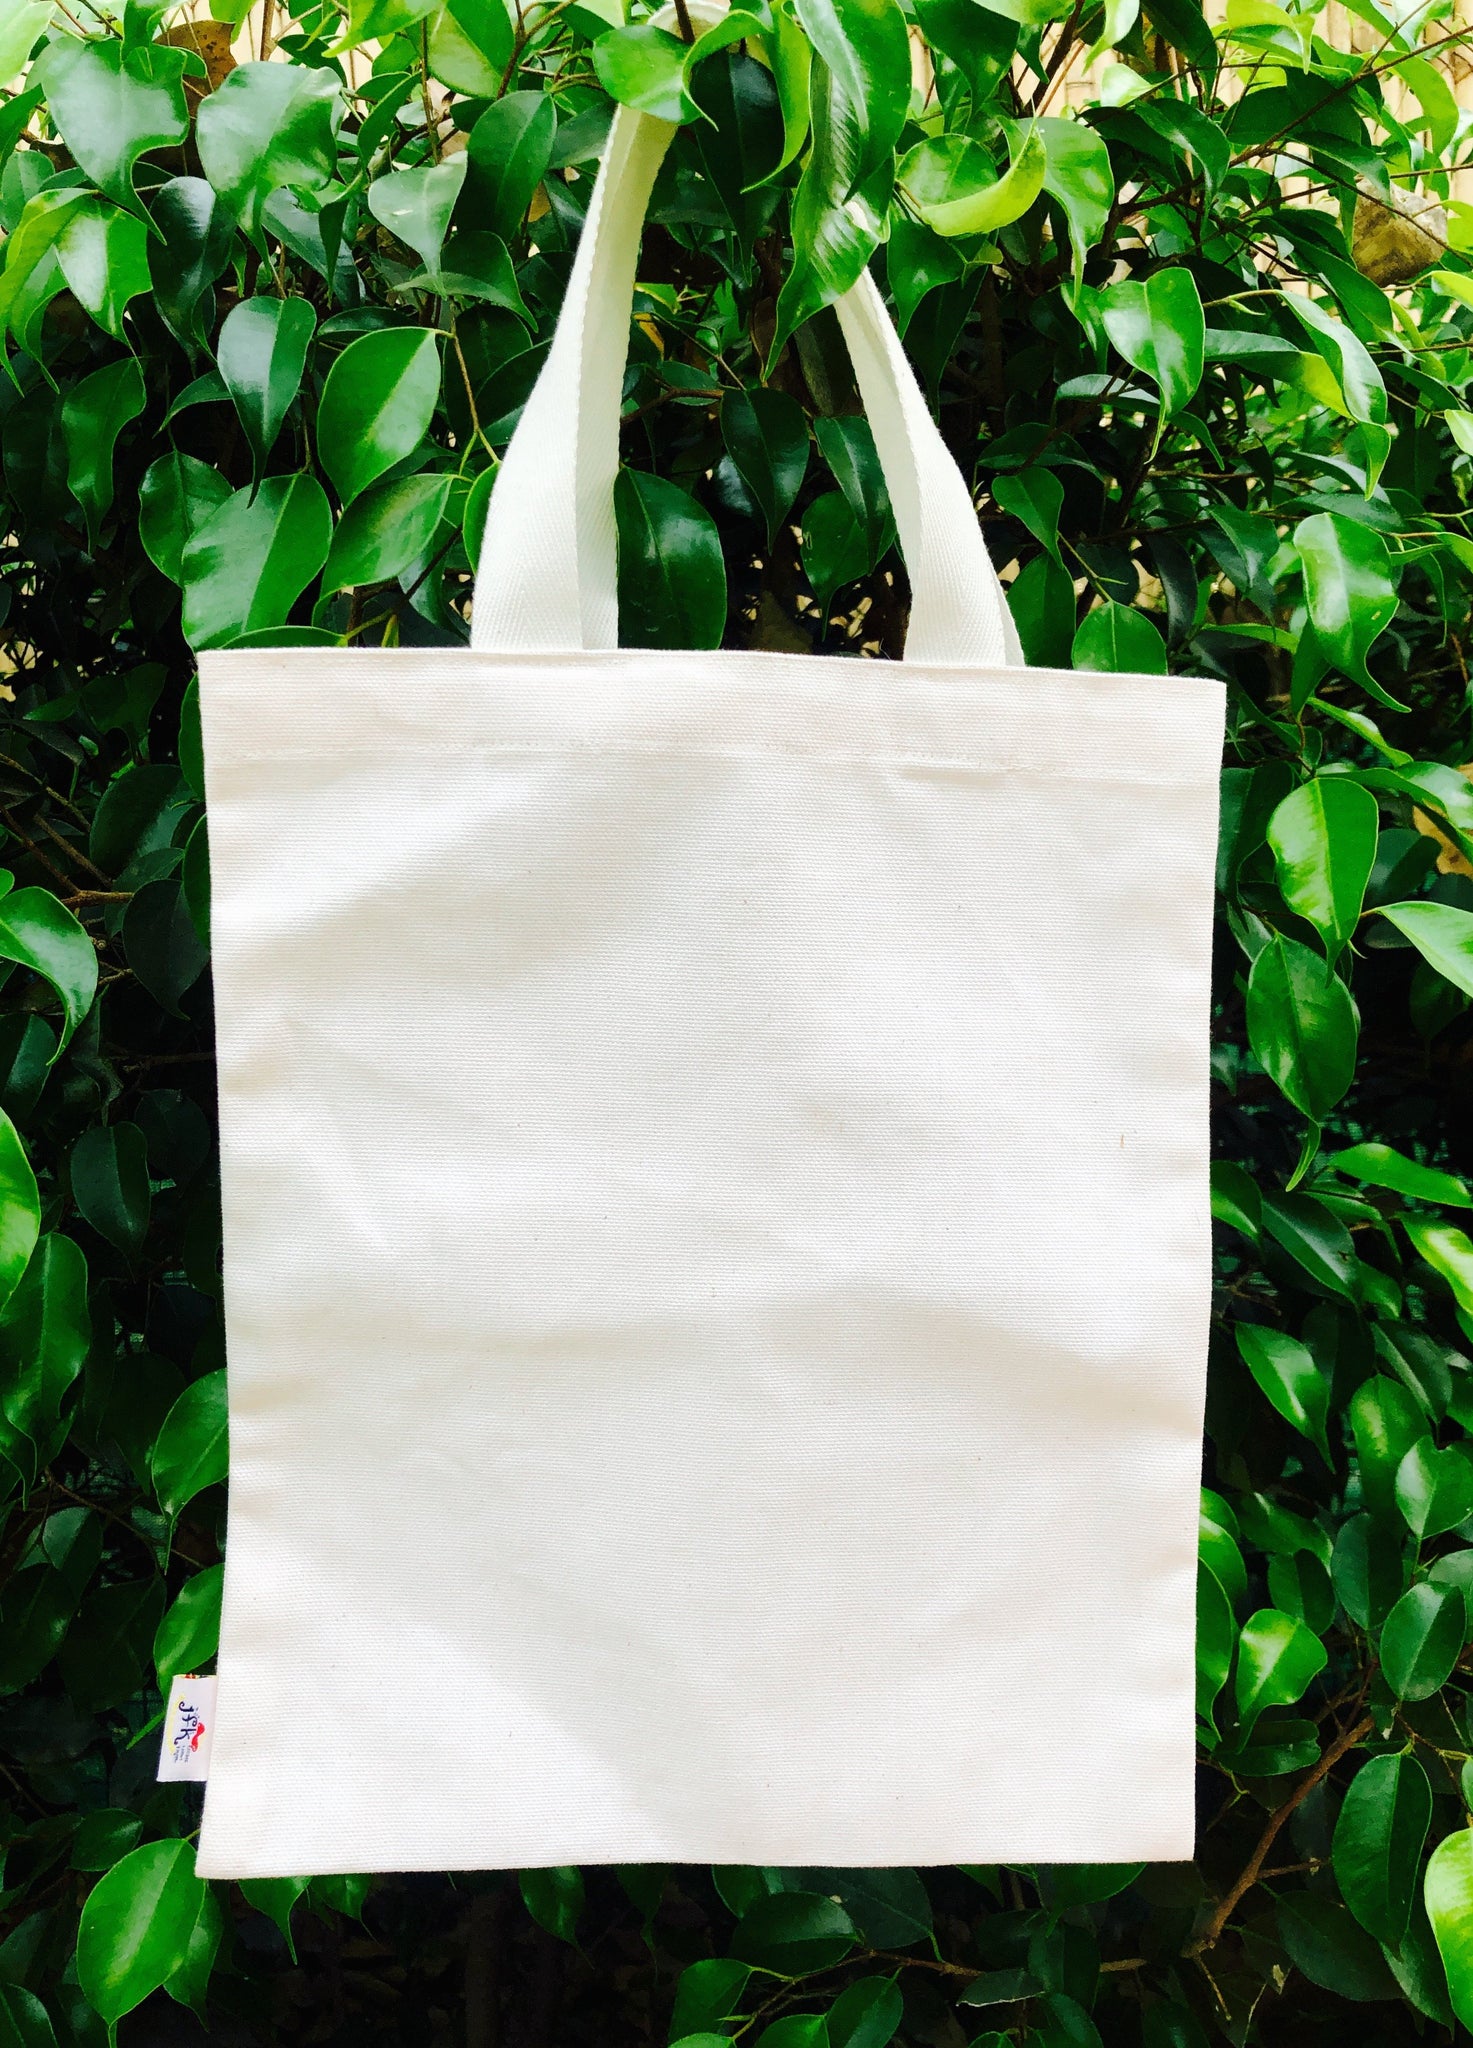 White Eco-friendly Canvas Tote Bag for Everyday Use : Foldable, Washab –  Sow and Grow®